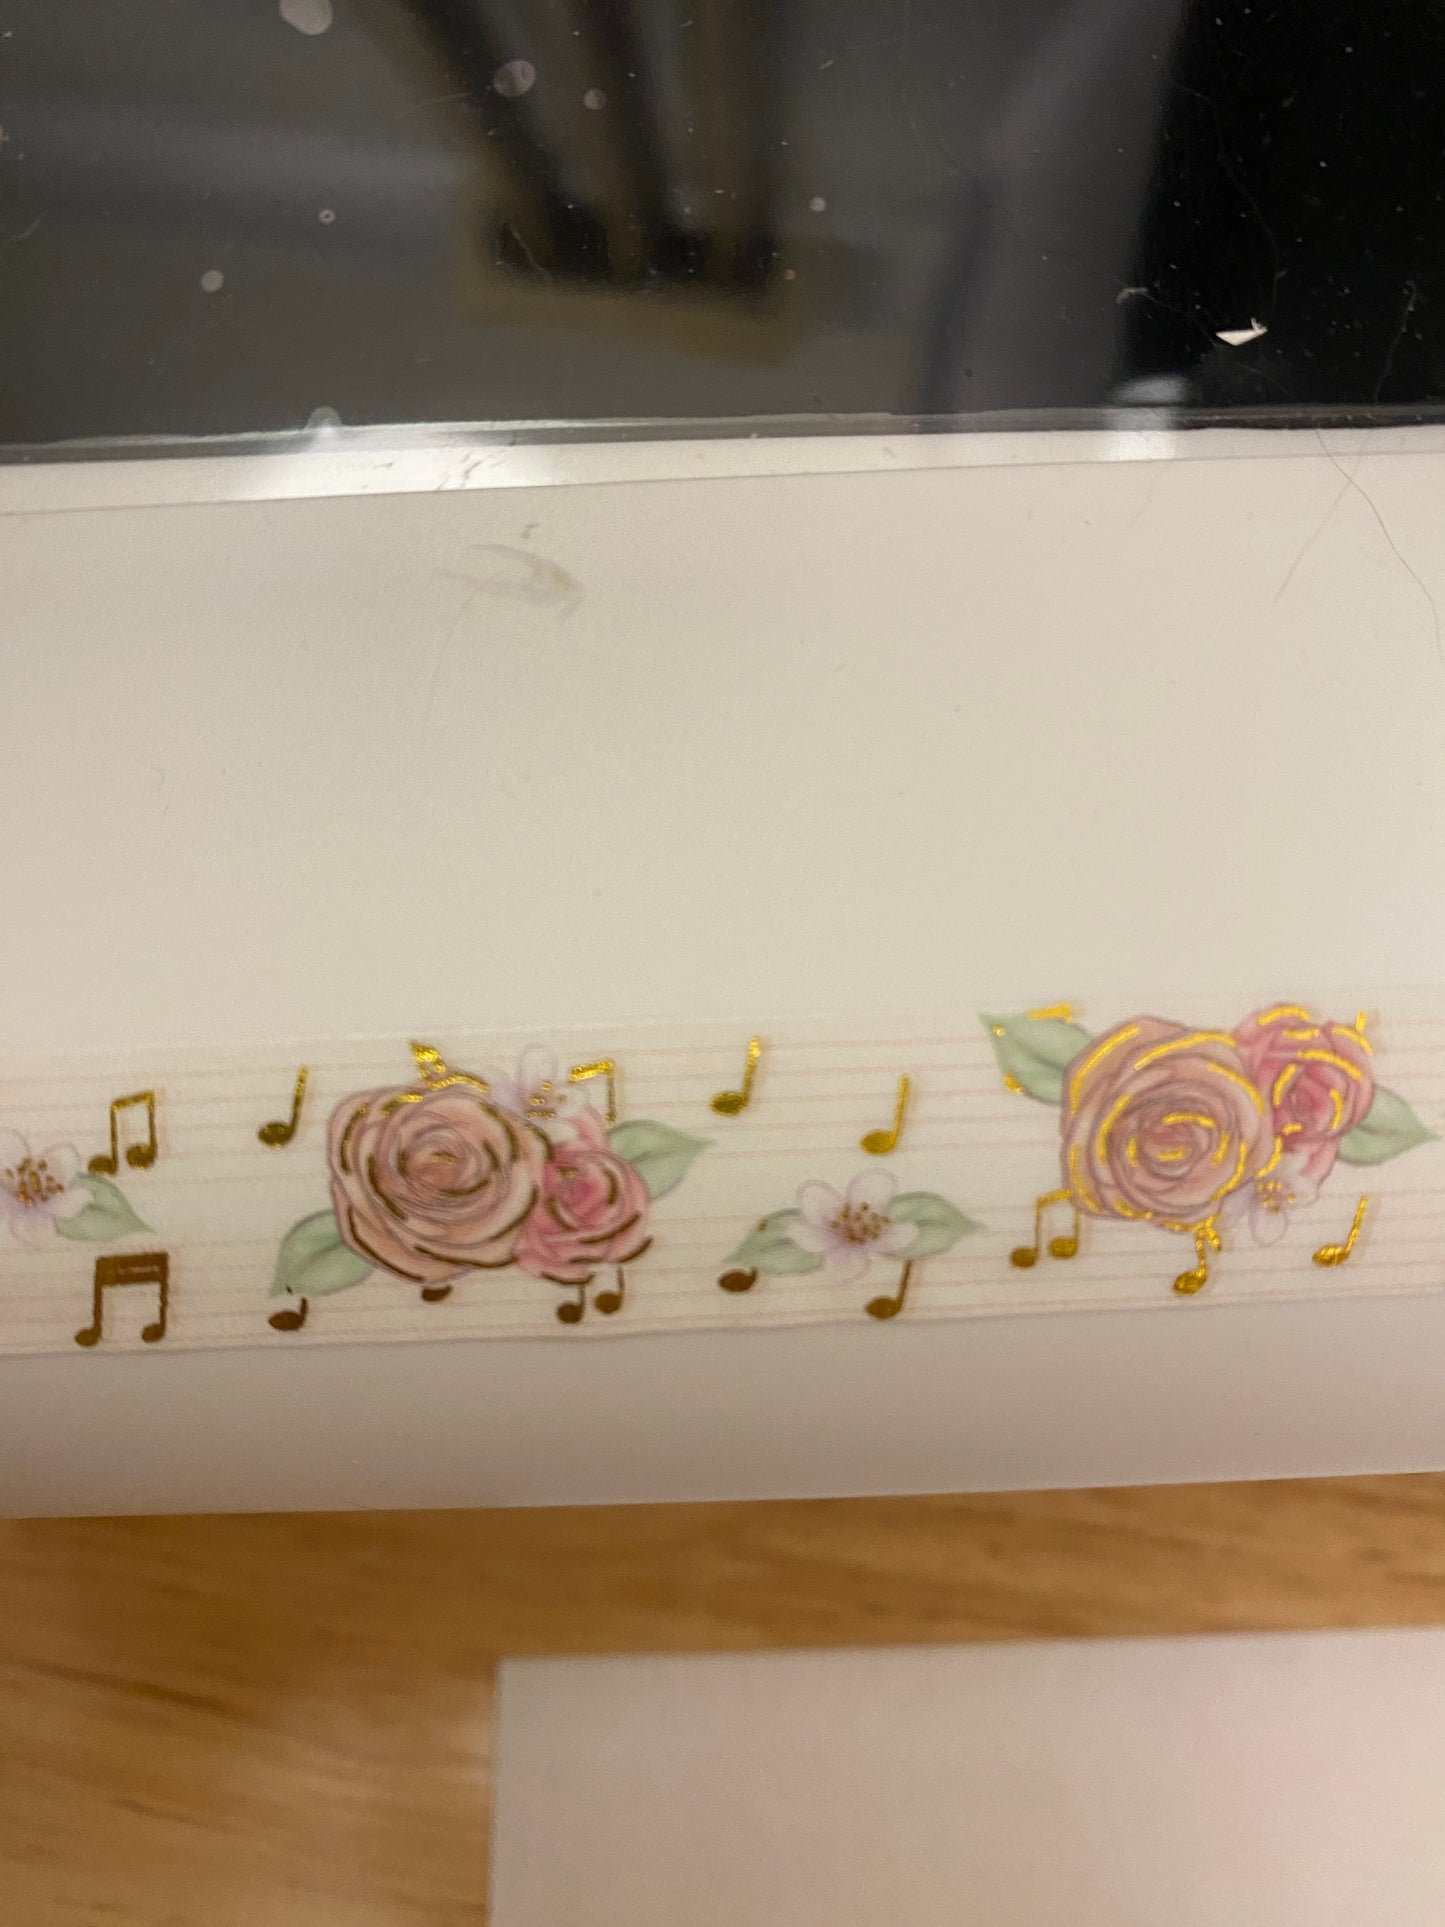 Gold Foil Musical Flowers Washi Tape